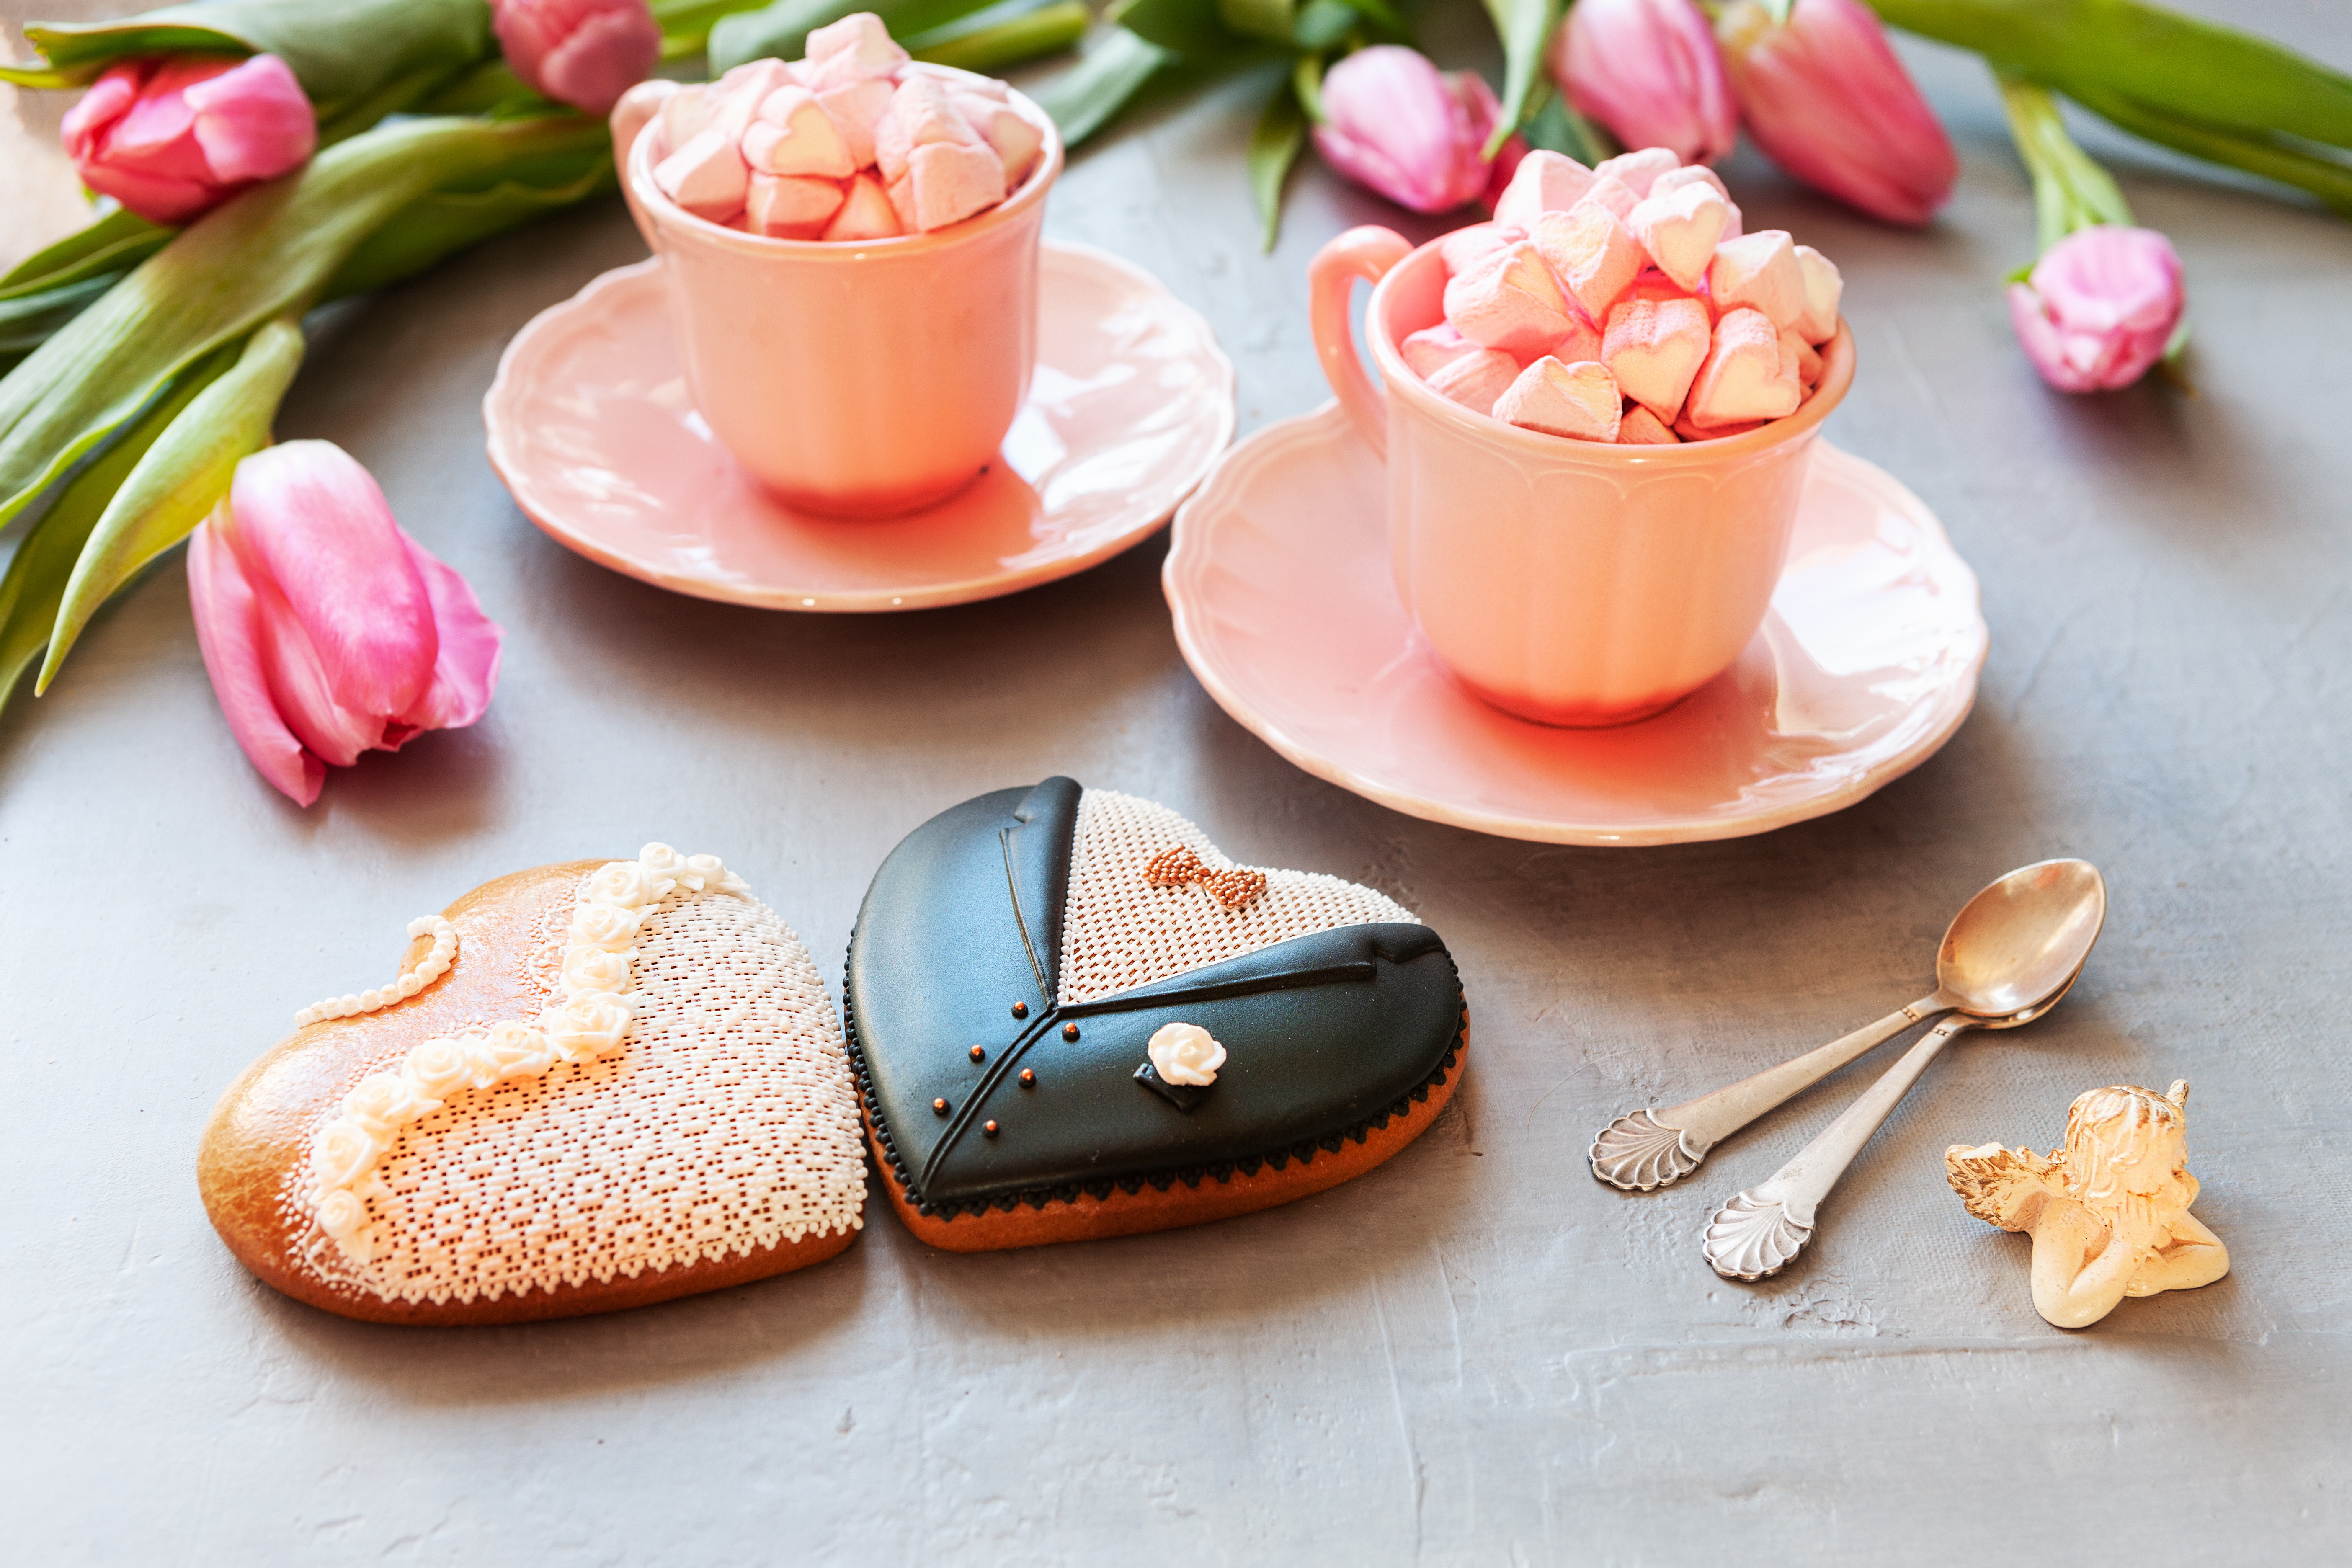 Bride Cookie Cup Groom Heart Shaped Love Marshmallow Pink Flower Still Life Tulip Wedding 5616x3744